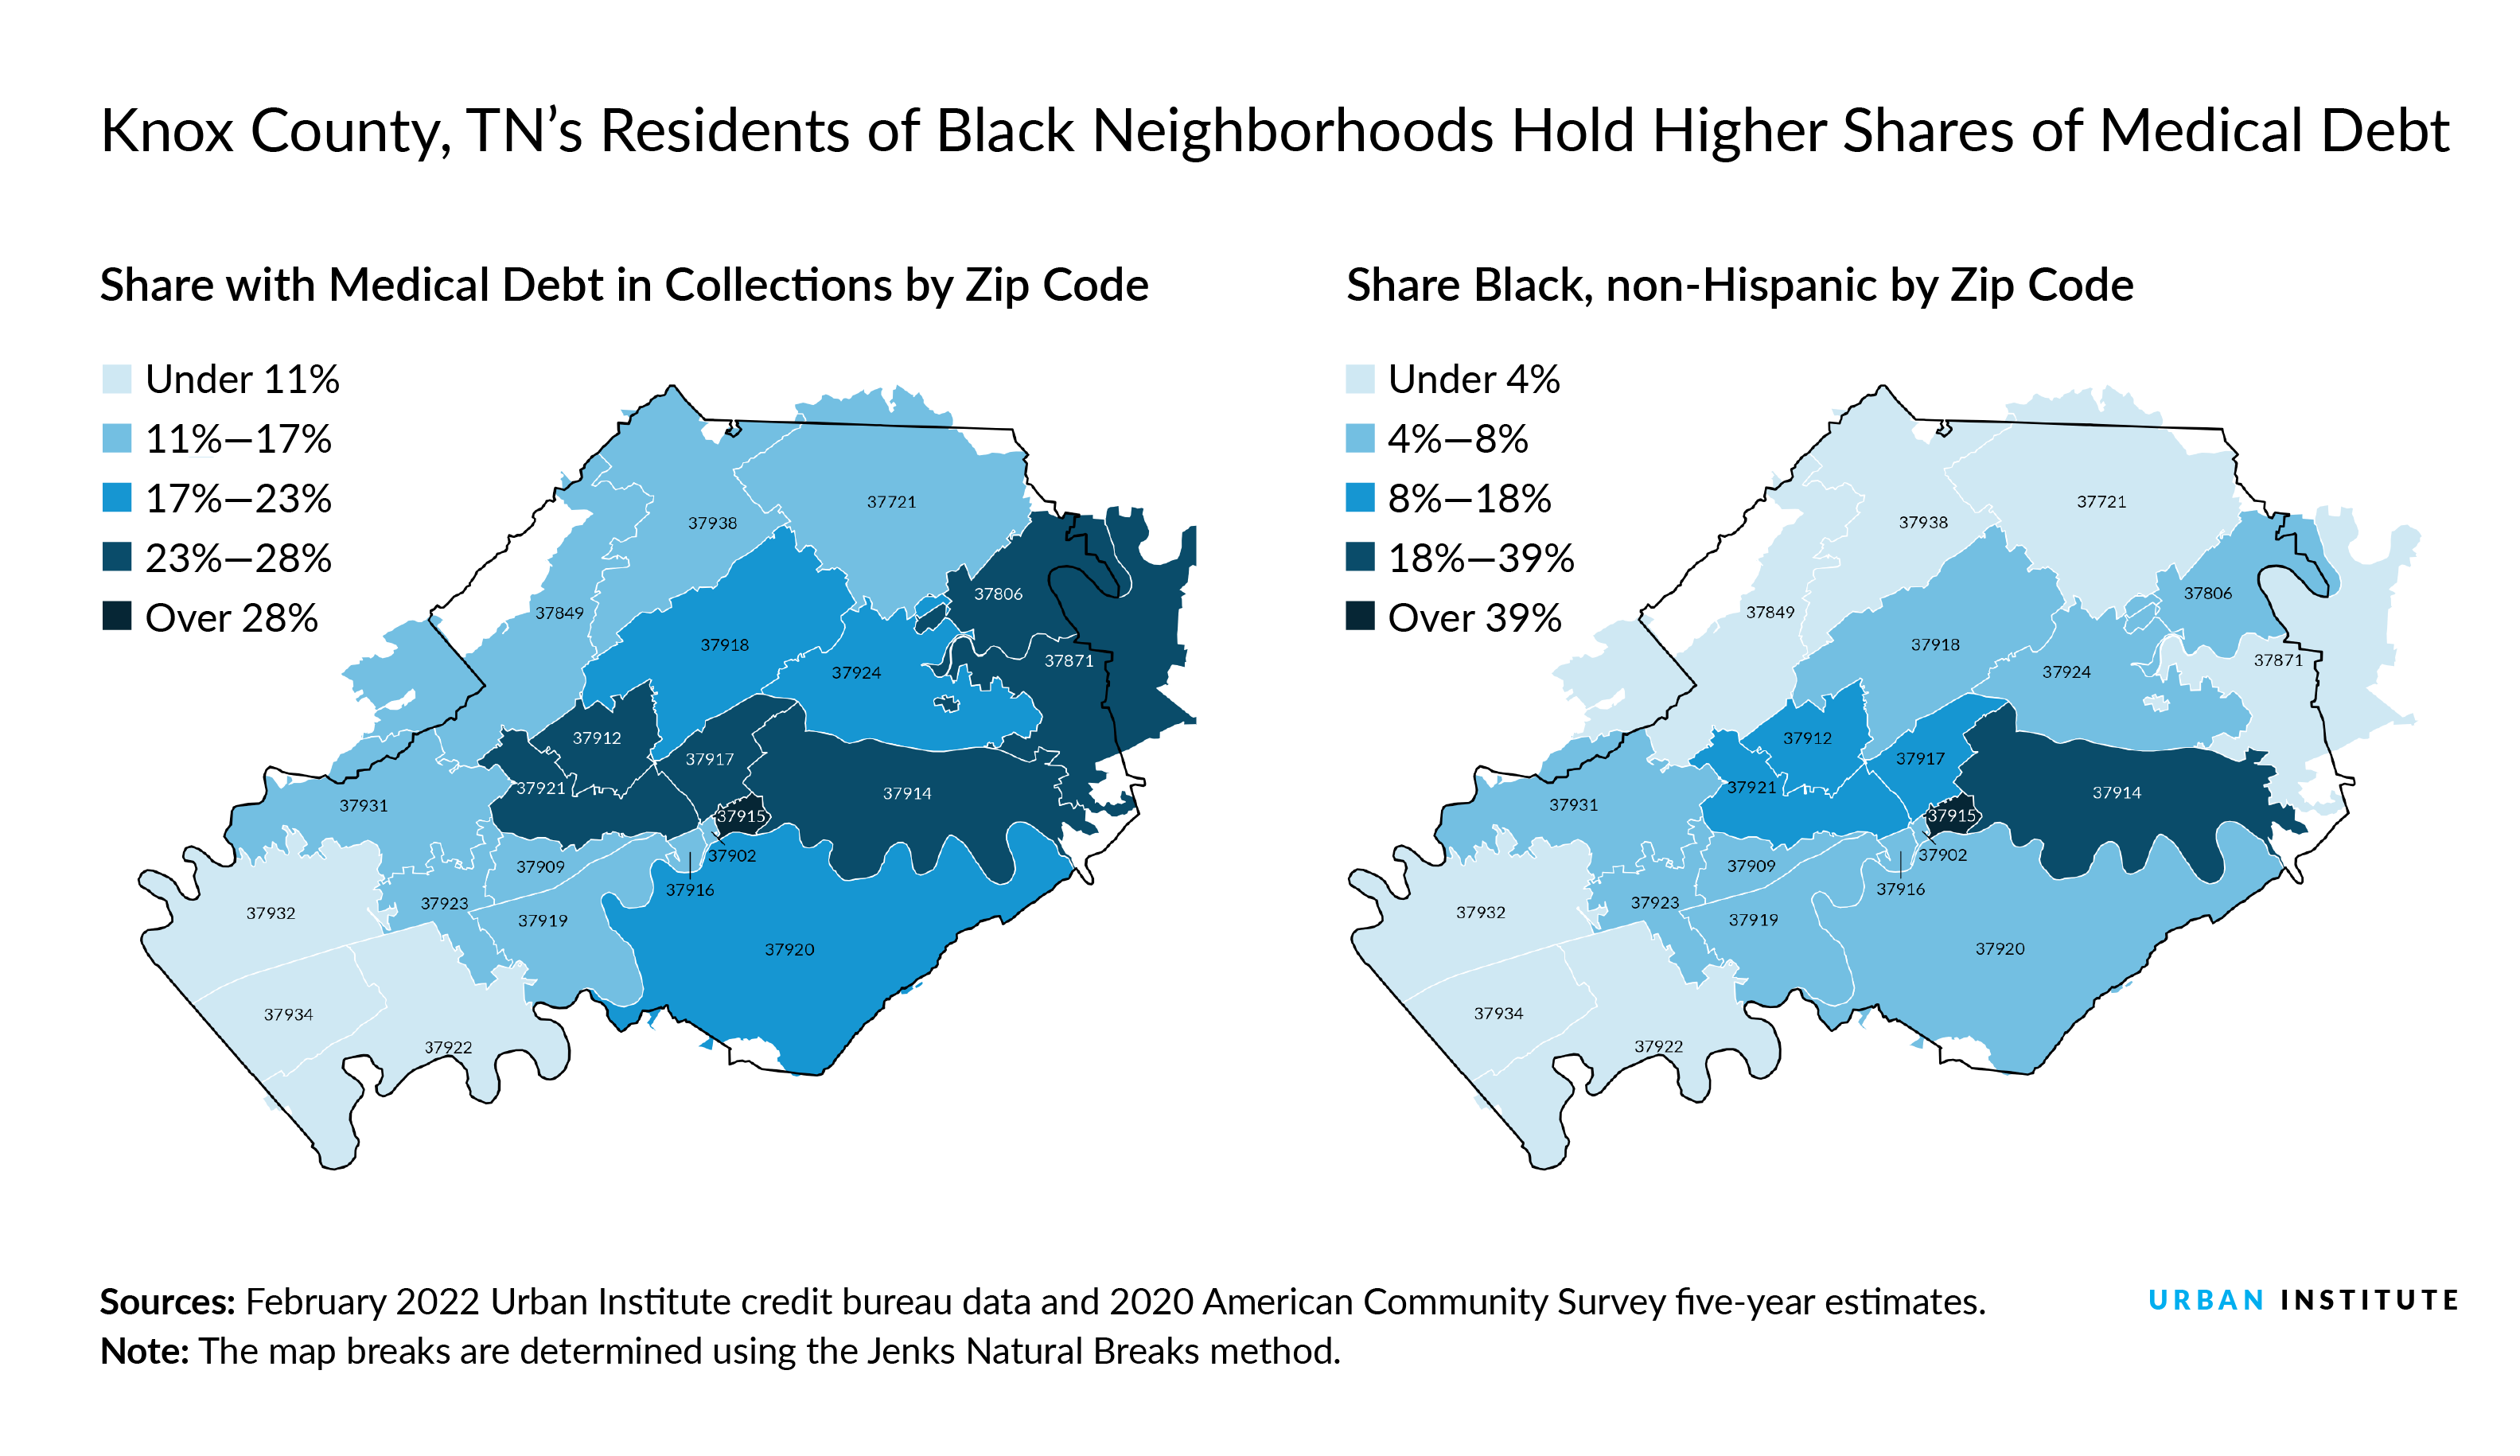 Two maps of Knox County that show zip codes where more Black residents live hold higher shares of medical debt. 